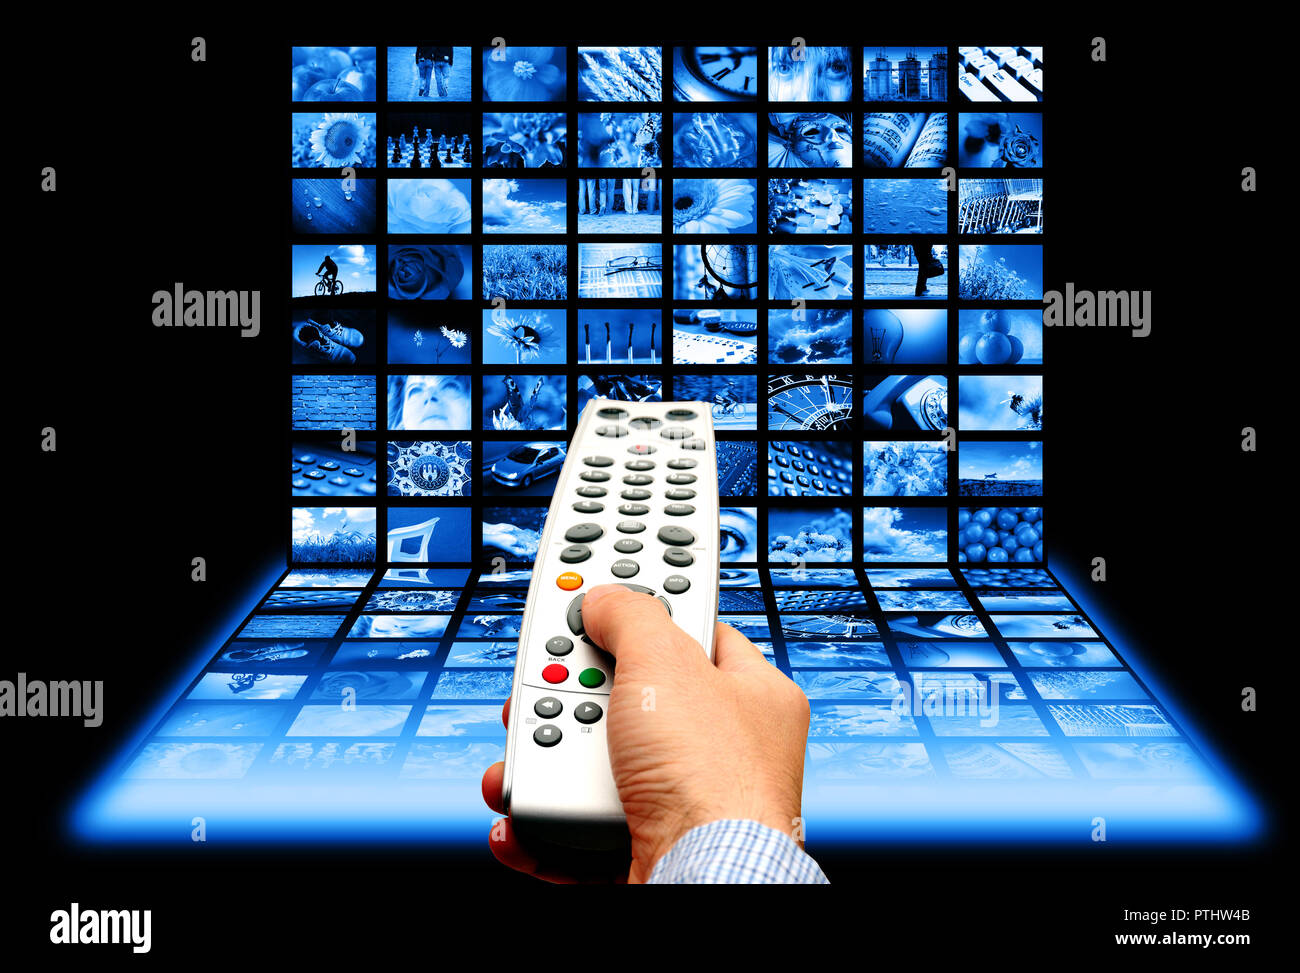 man hand pointing a remote control to a screen with multiple images Stock Photo